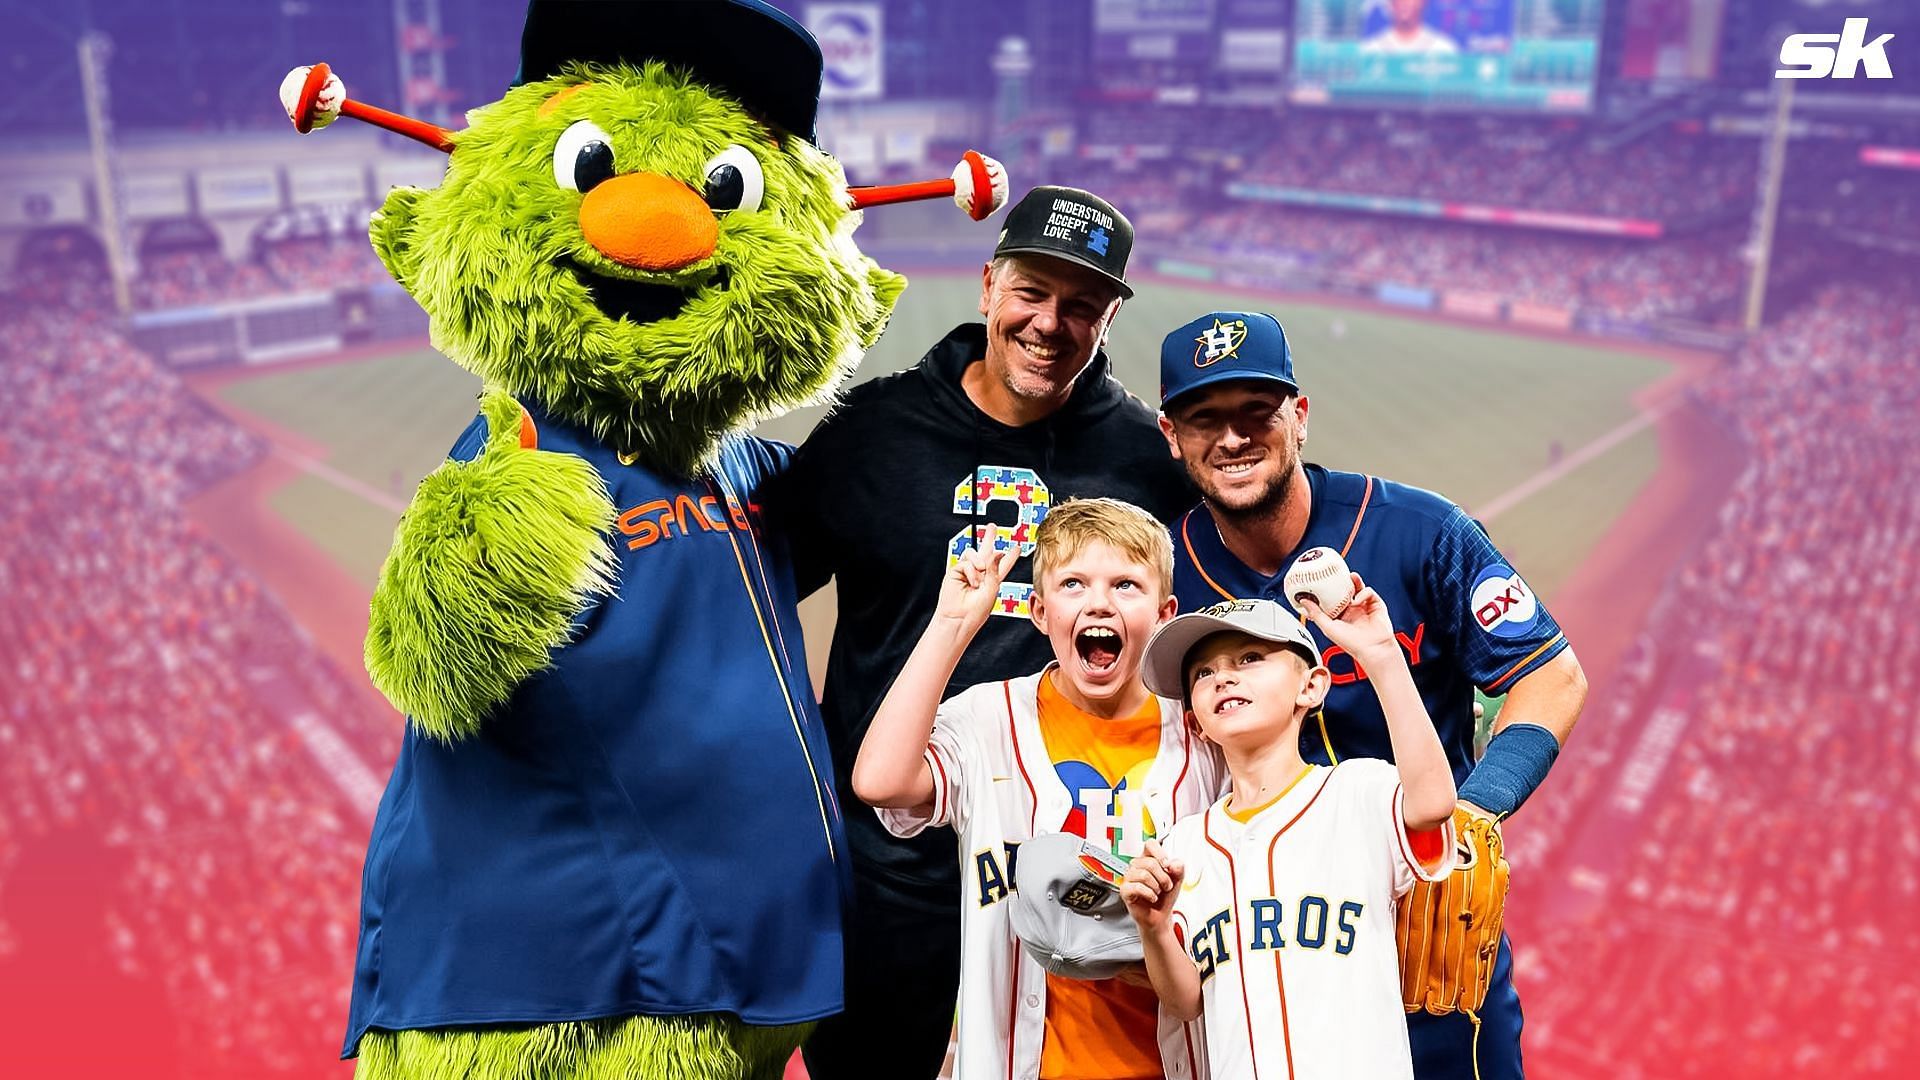 In Photos: Alex Bregman's non-profit organization receives $10,000 donation from Astros Foundation for autism advocacy